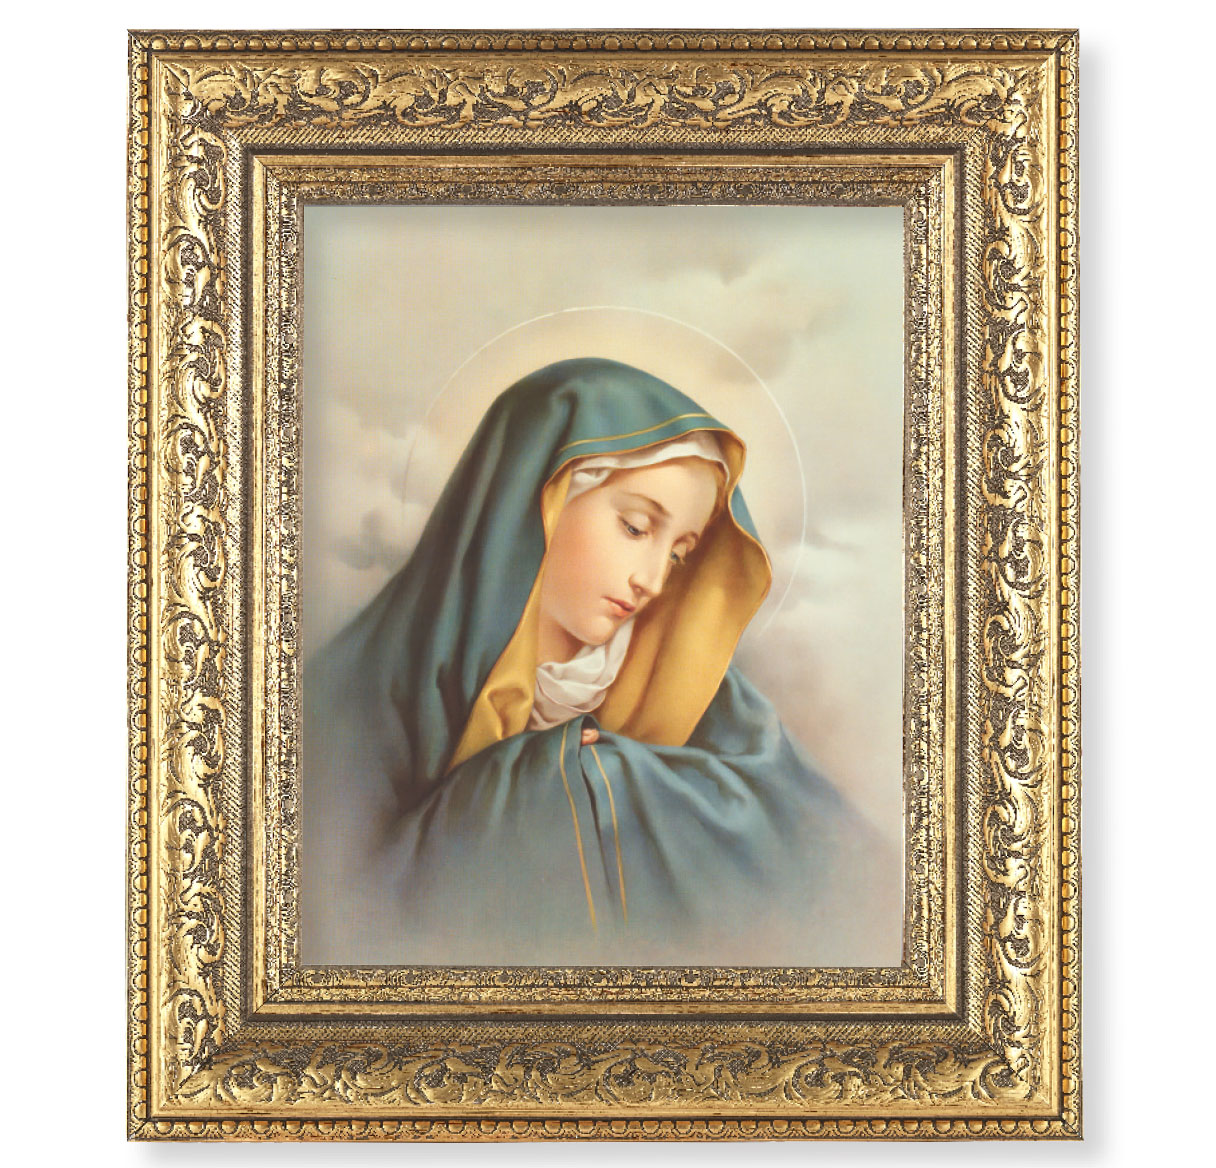 Print Our Lady of Sorrows 8 x 10 inch Gold Framed